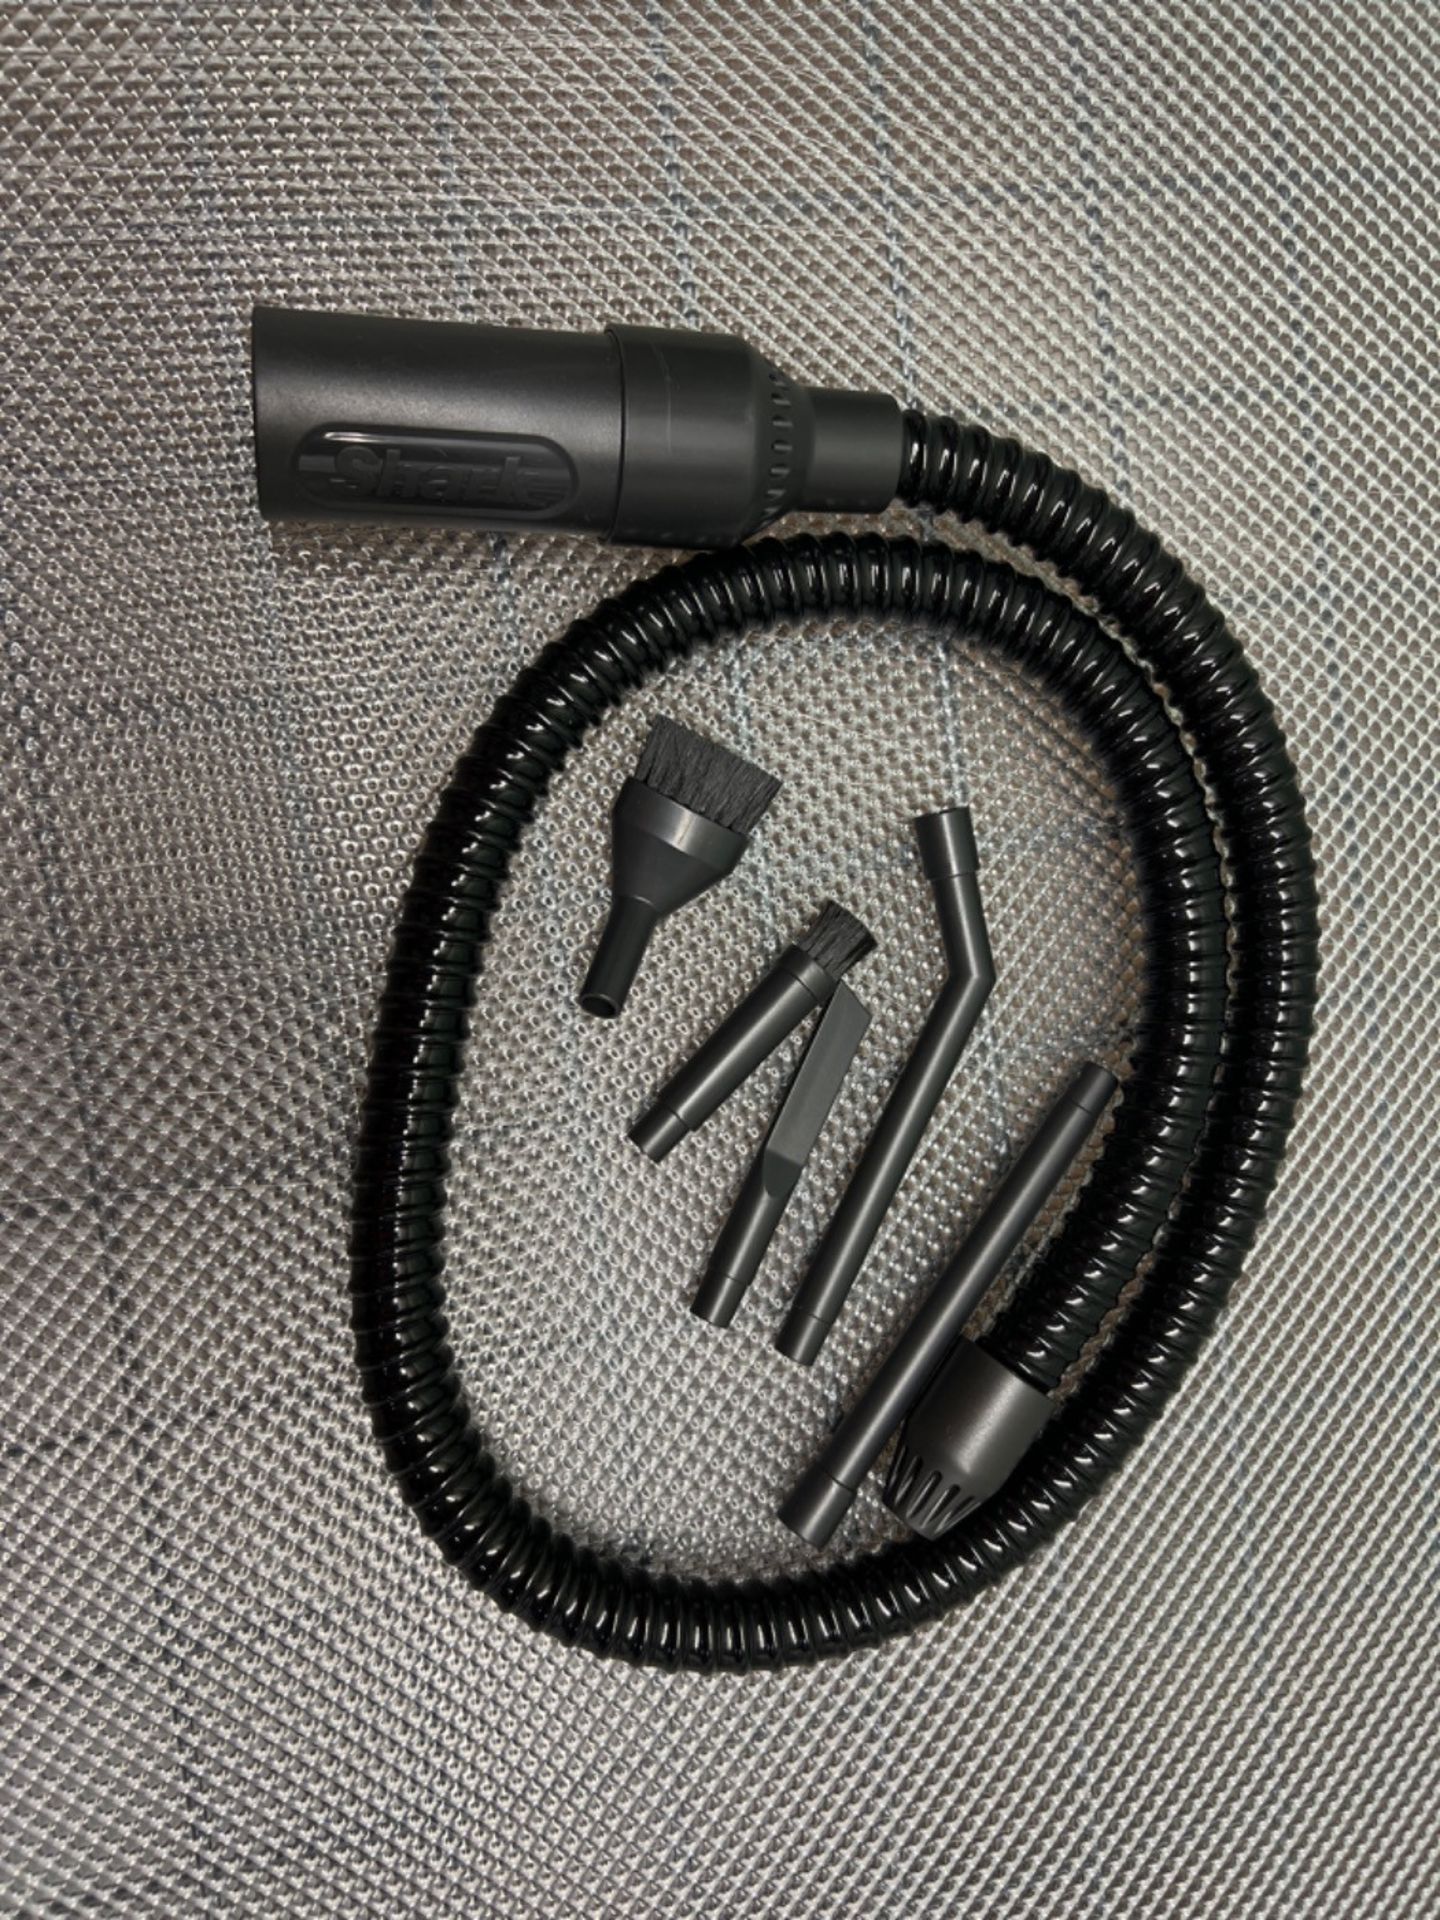 Shark Car Detail Kit [XHMCR380EUK] Official Accessory Compatible with Selected Shark Vacuum Cleaner - Image 3 of 3